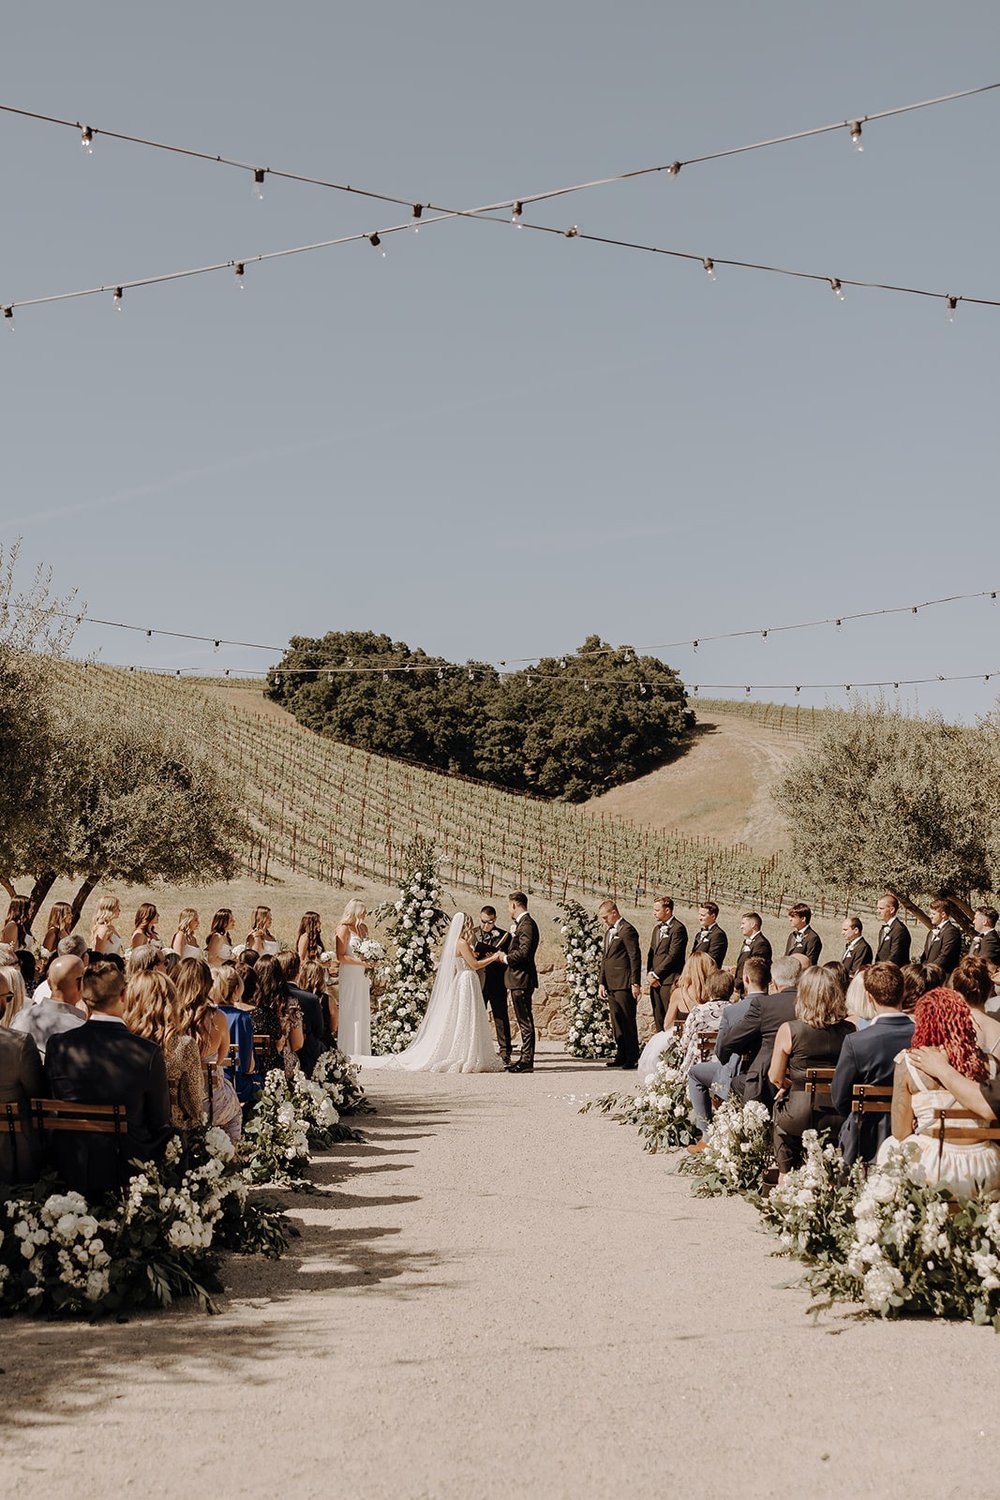 Bride and groom hold hands at their Tuscan-style wedding ceremony